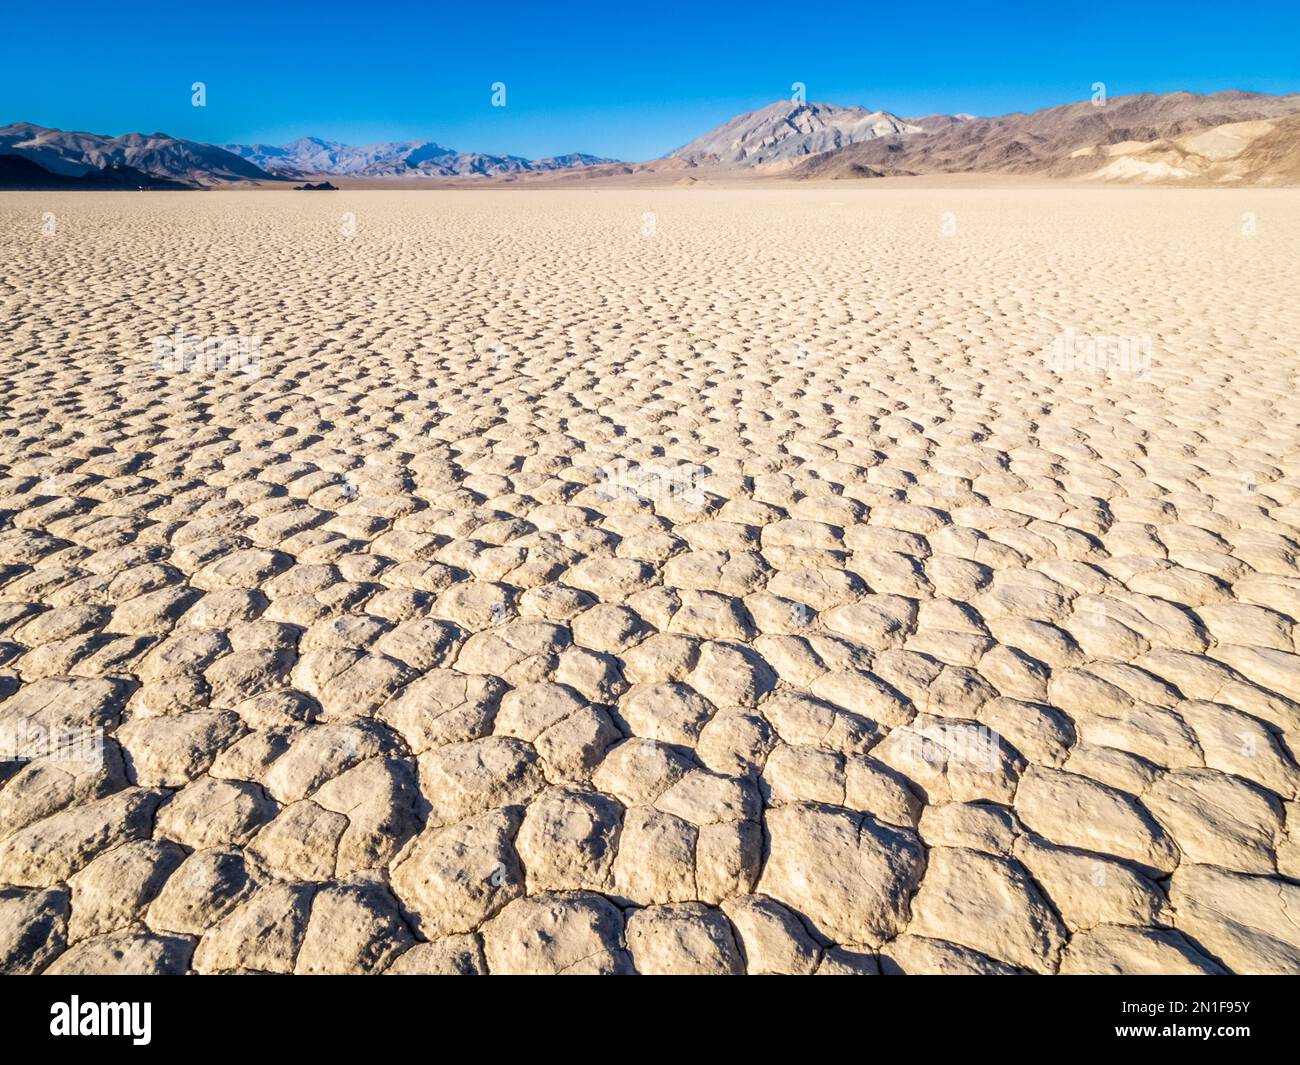 The Racetrack, a playa or dried up lakebed, in Death Valley National Park, California, United States of America, North America Stock Photo